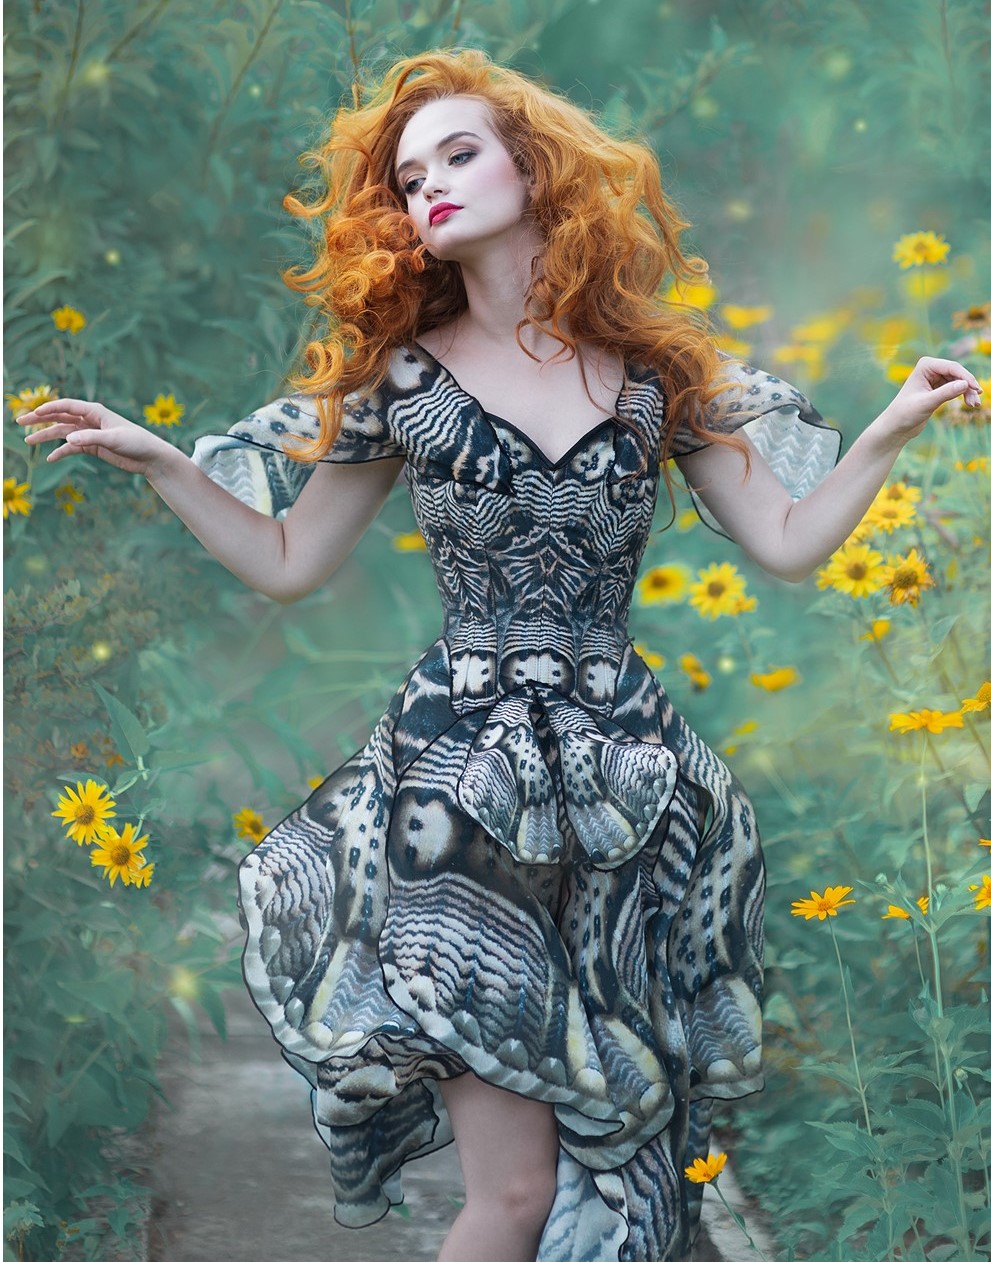 The Absolutely Stunning Dresses And Corsets Inspired By Butterfly Wings Of Bibian Blue 14